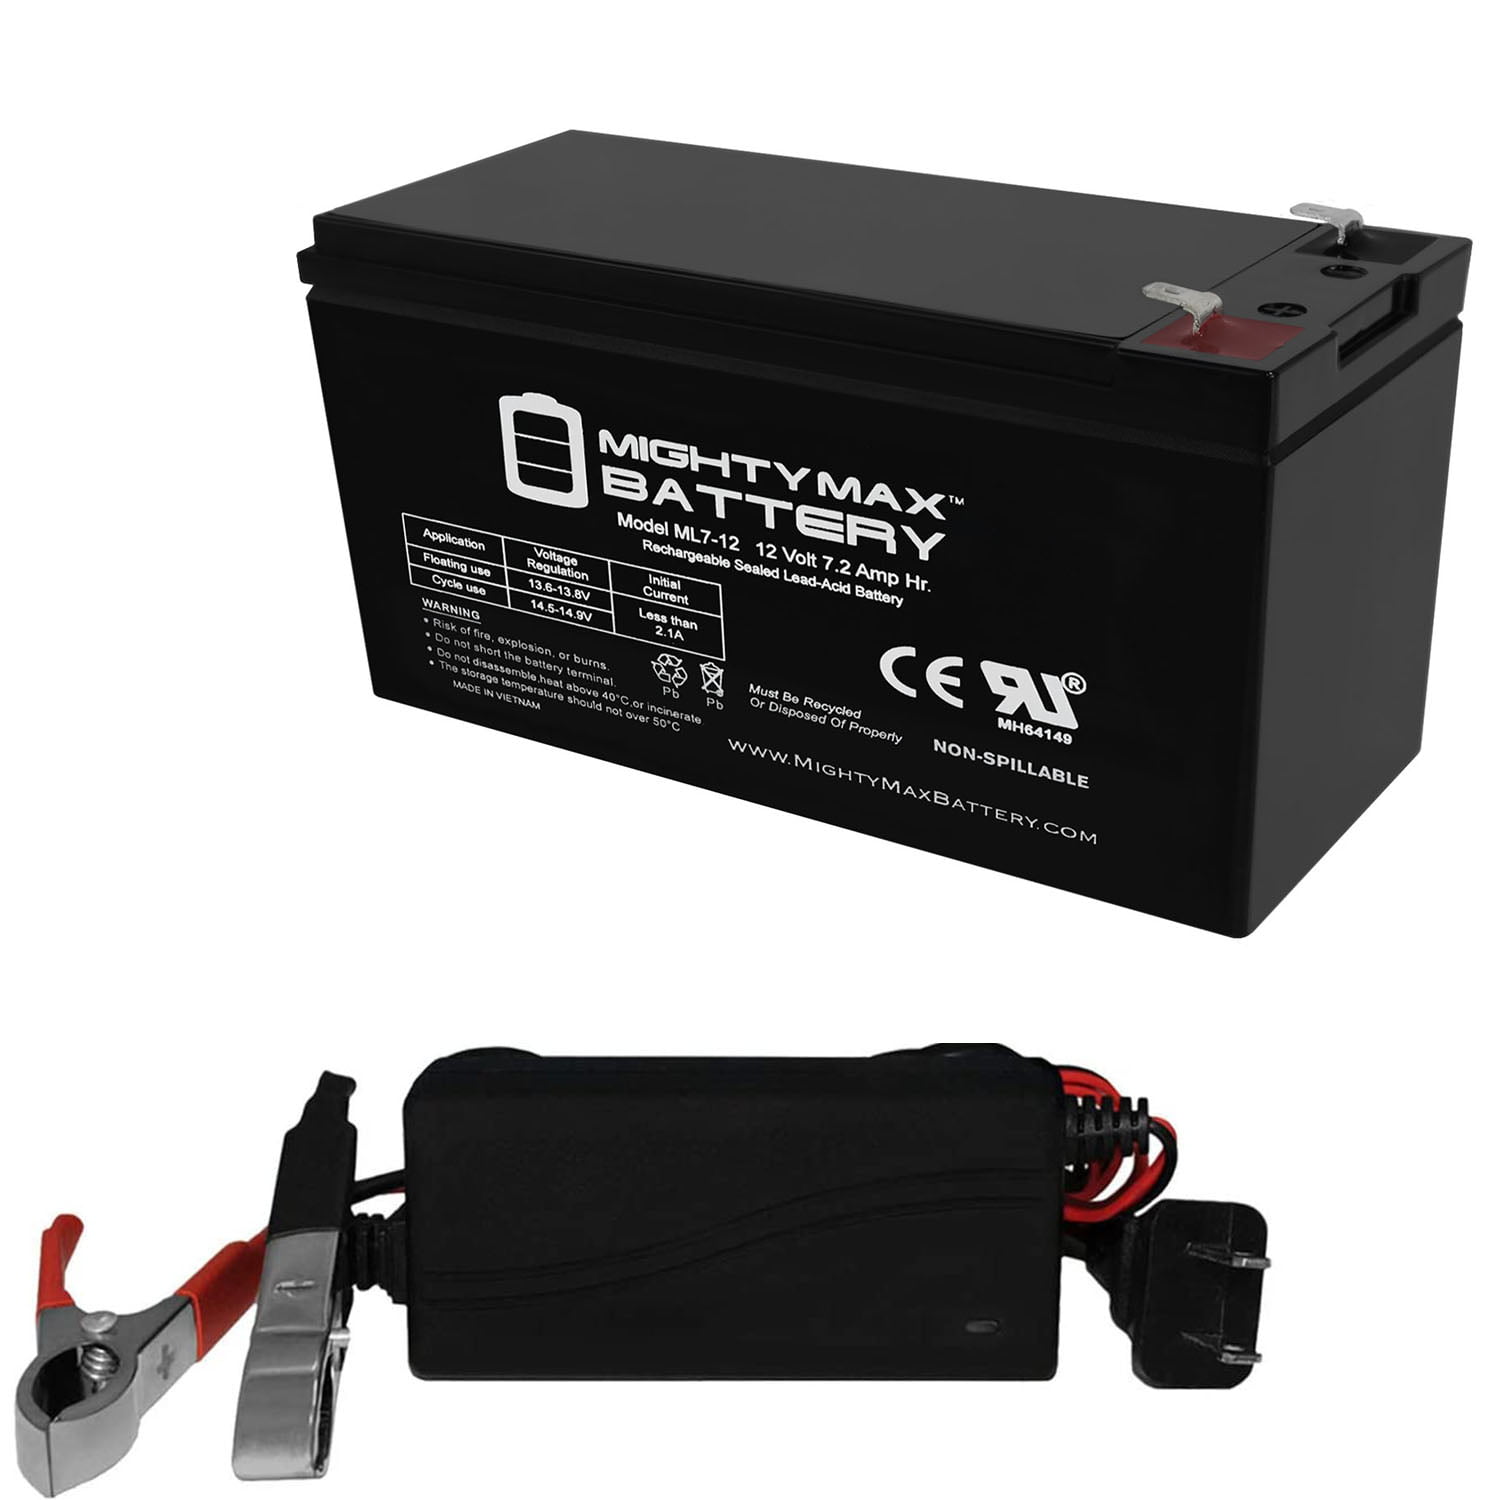 Mighty Max Battery ML7-12 12V 7.2AH GS Portalac PX12072 Replacement Battery Brand Product